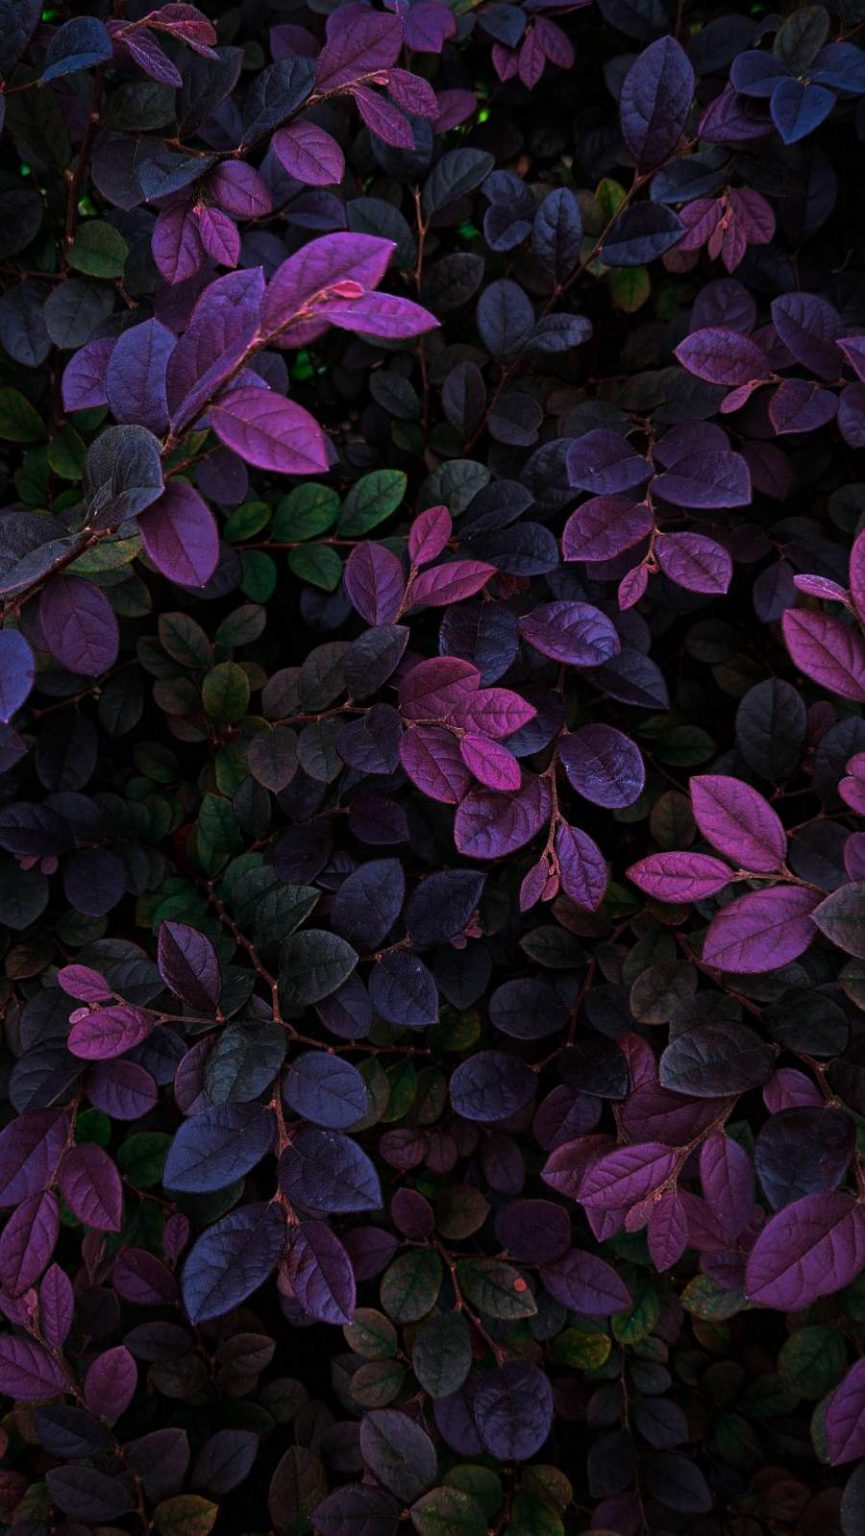 Nature Foliage Plants Wallpaper - IPhone Wallpapers : iPhone Wallpapers